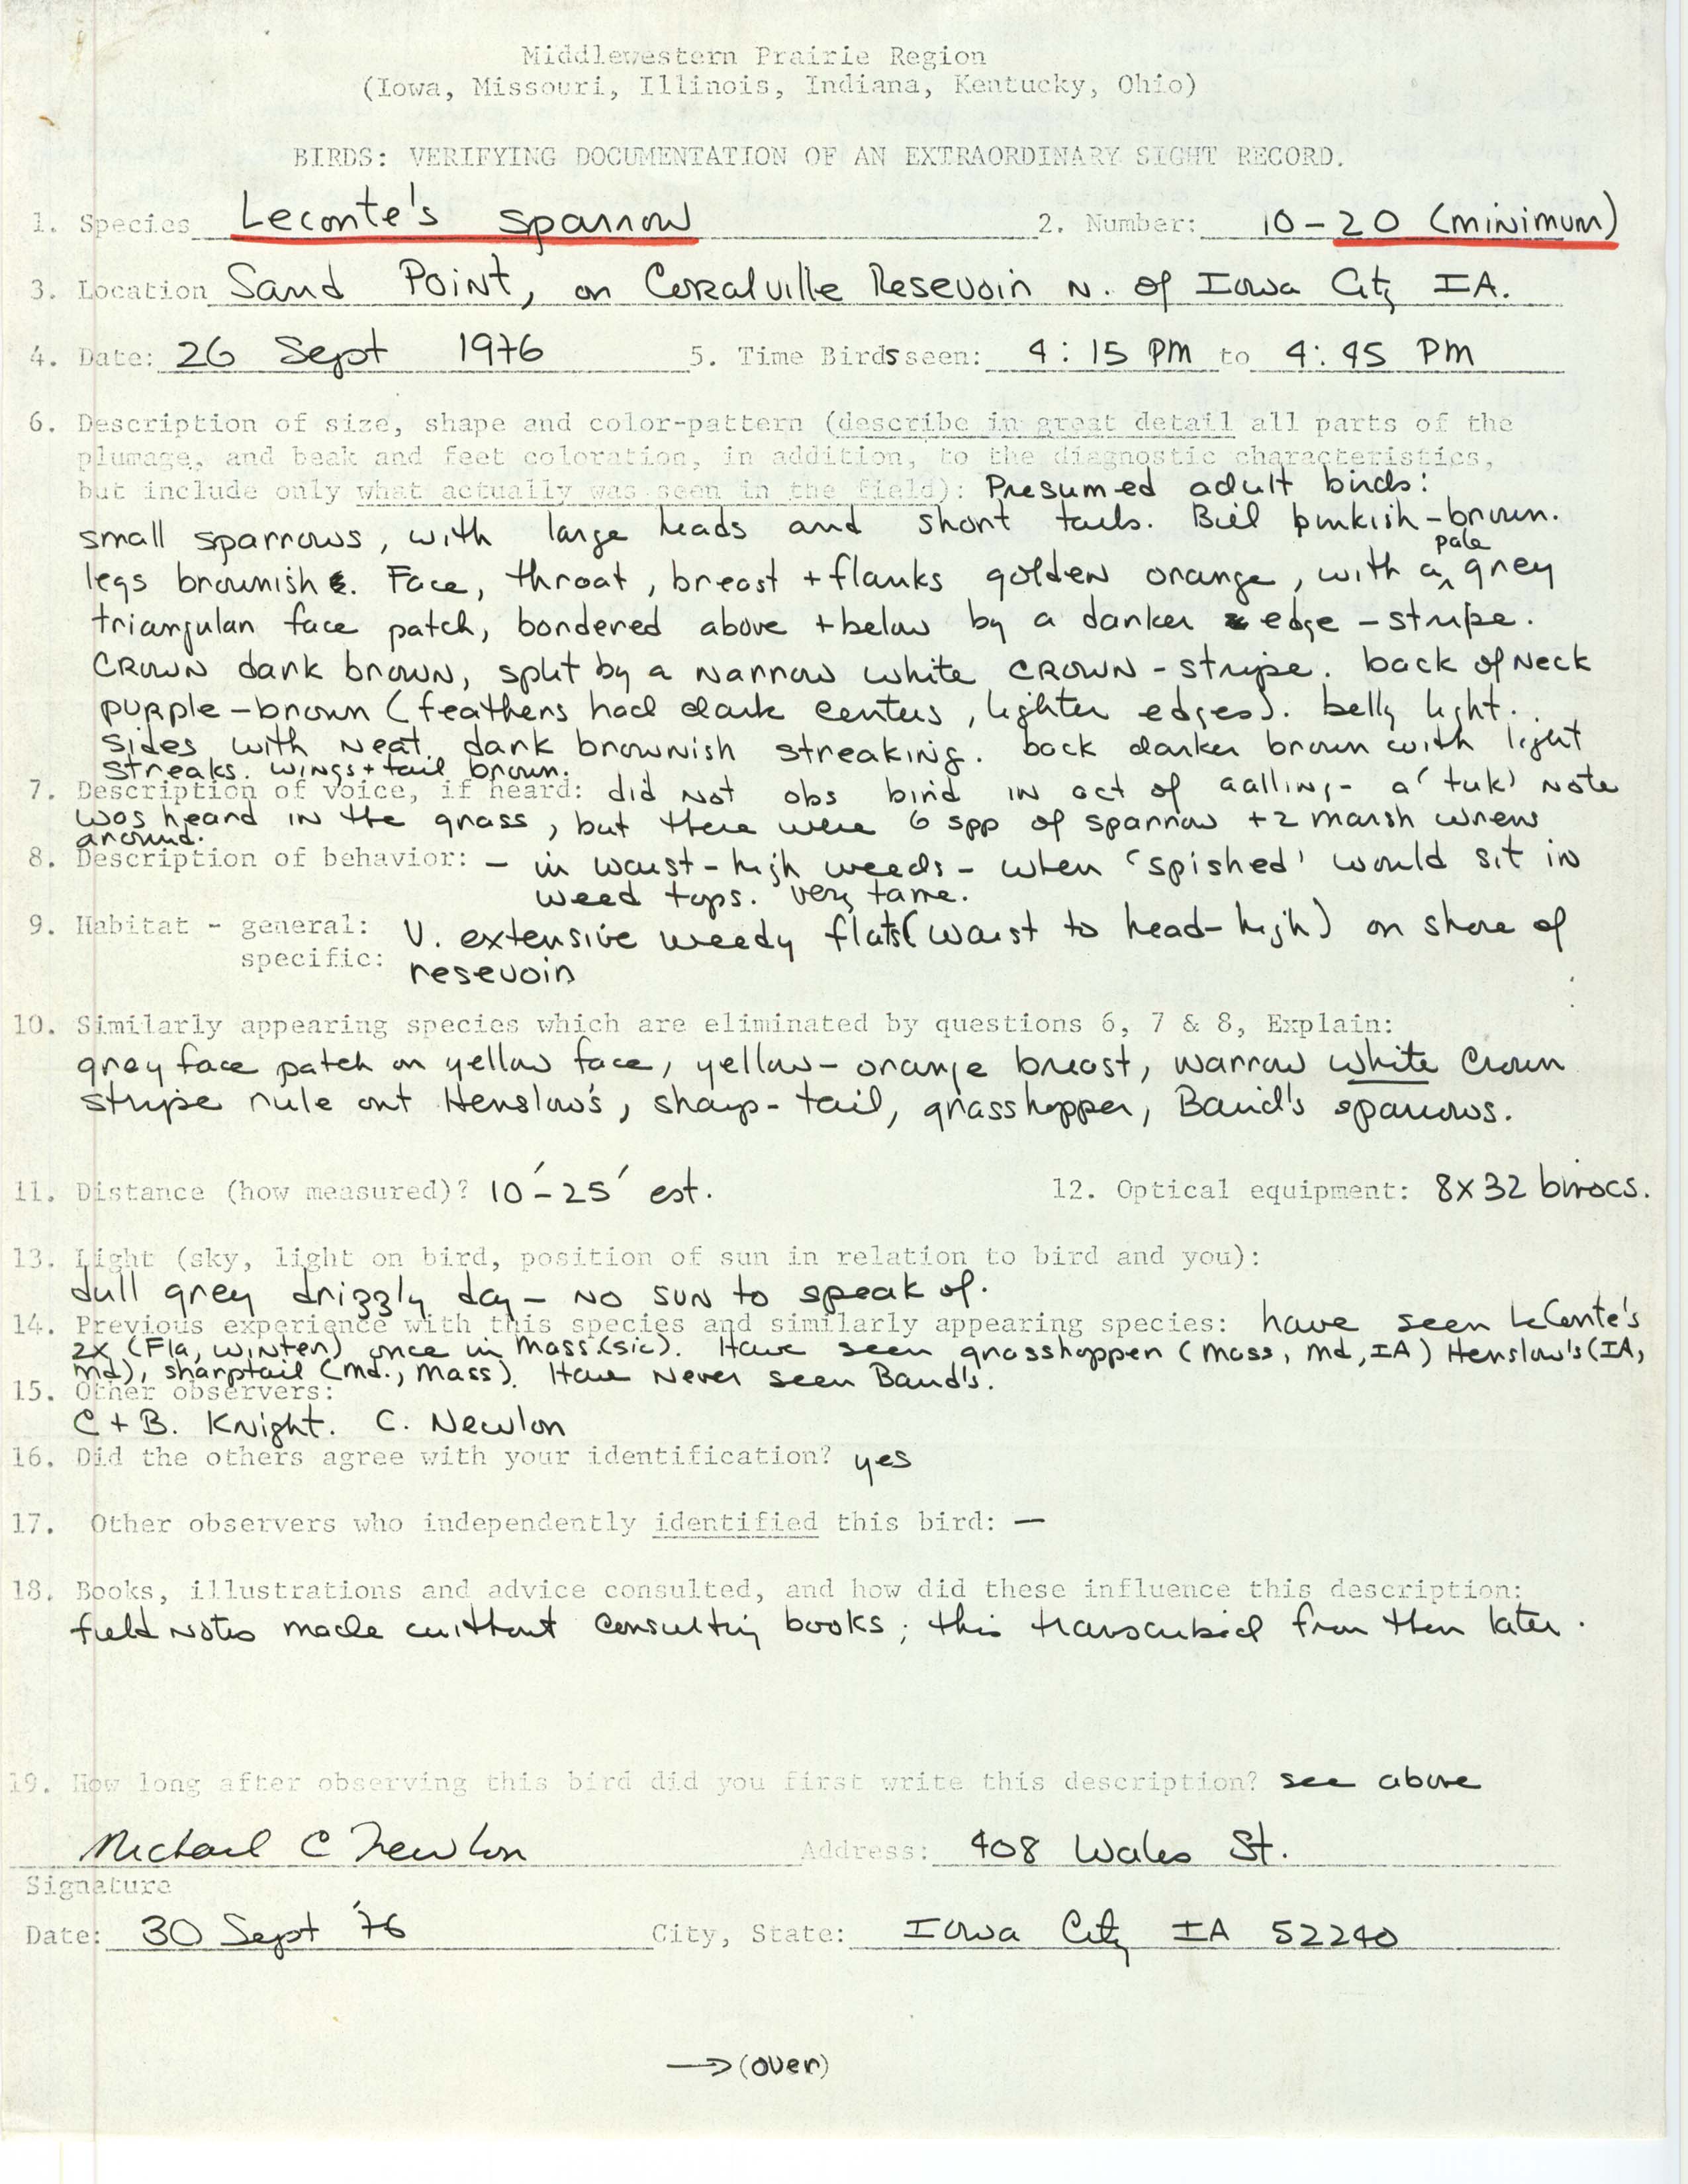 Rare bird documentation form for LeConte's Sparrow at Sand Point in Coralville Reservoir, 1976